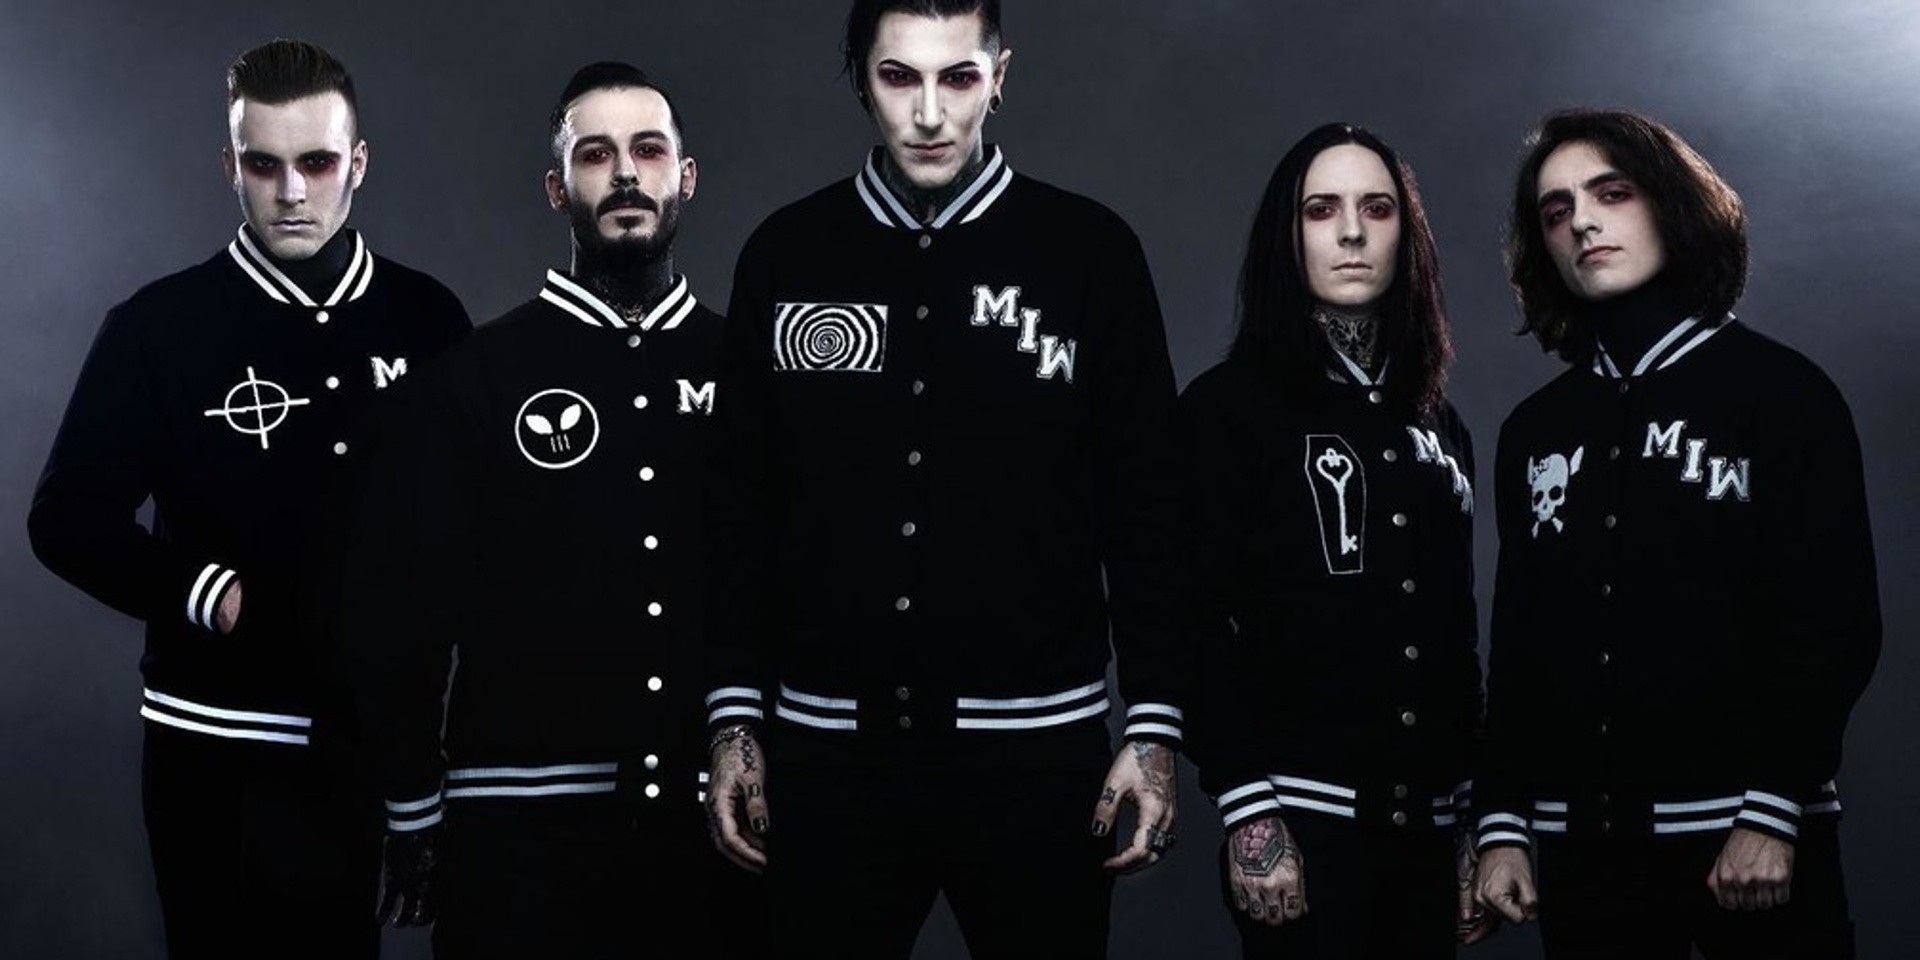 Motionless In White announces fifth studio album, releases two new singles ‘Disguise’ and ‘Brand New Numb’ – listen 